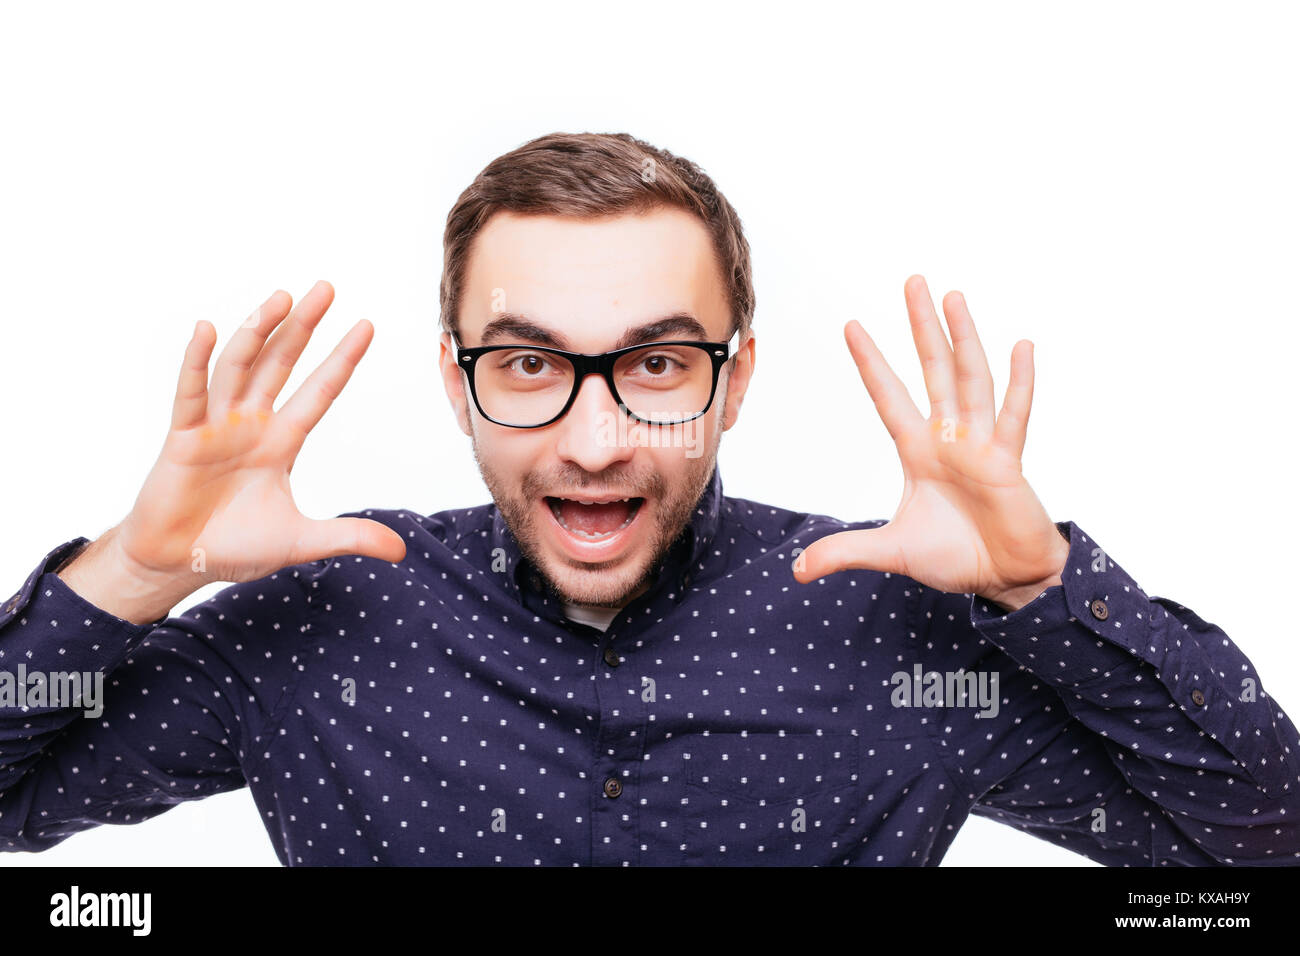 Retarded man making funny faces is silly Stock Photo